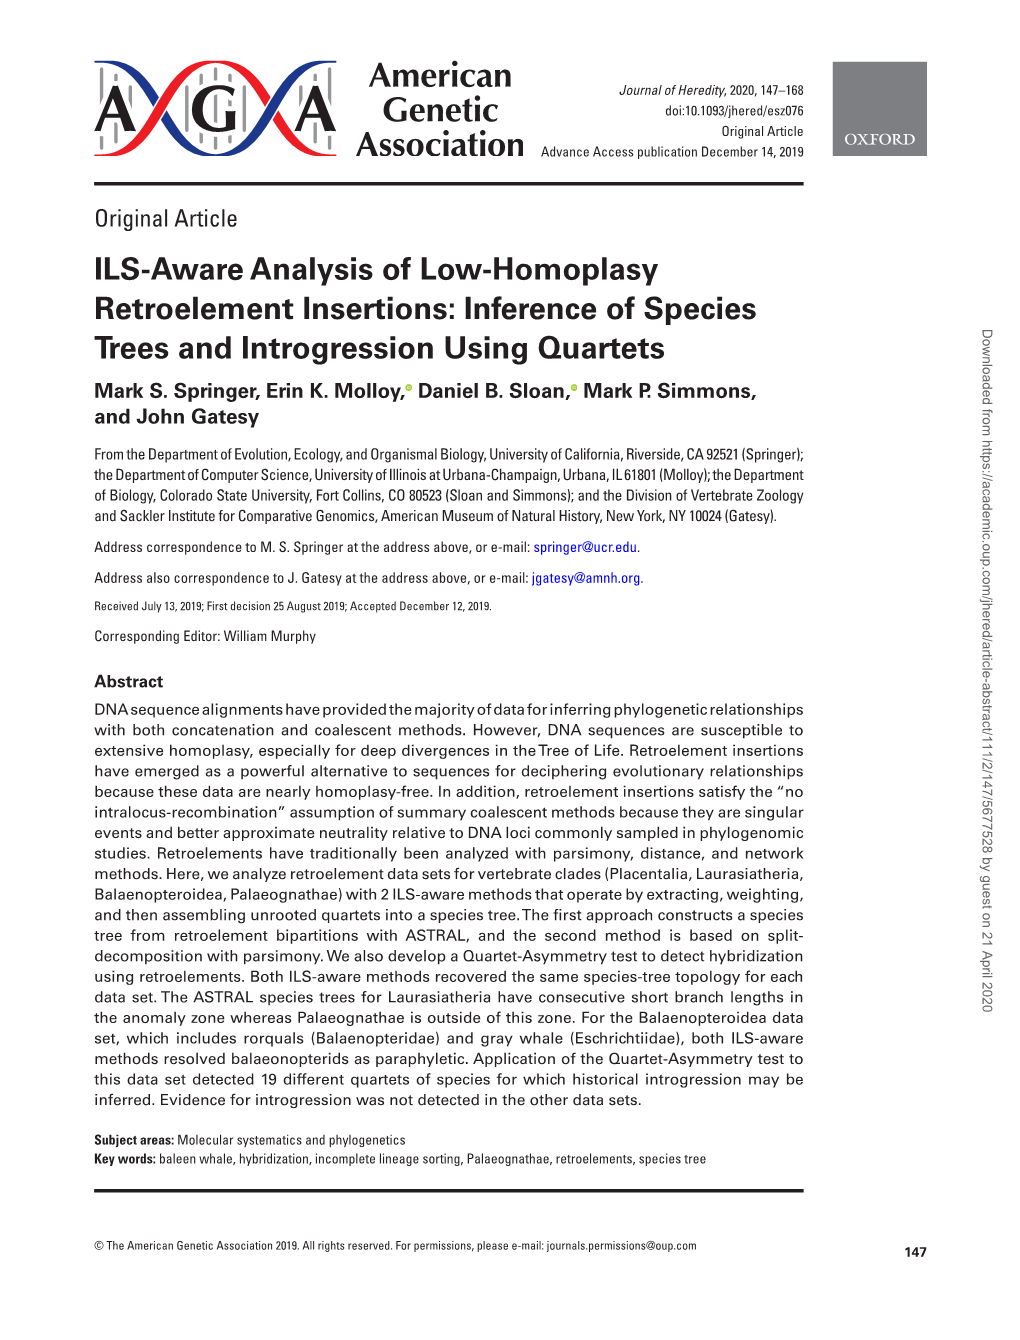 Inference of Species Trees and Introgression Using Quartets